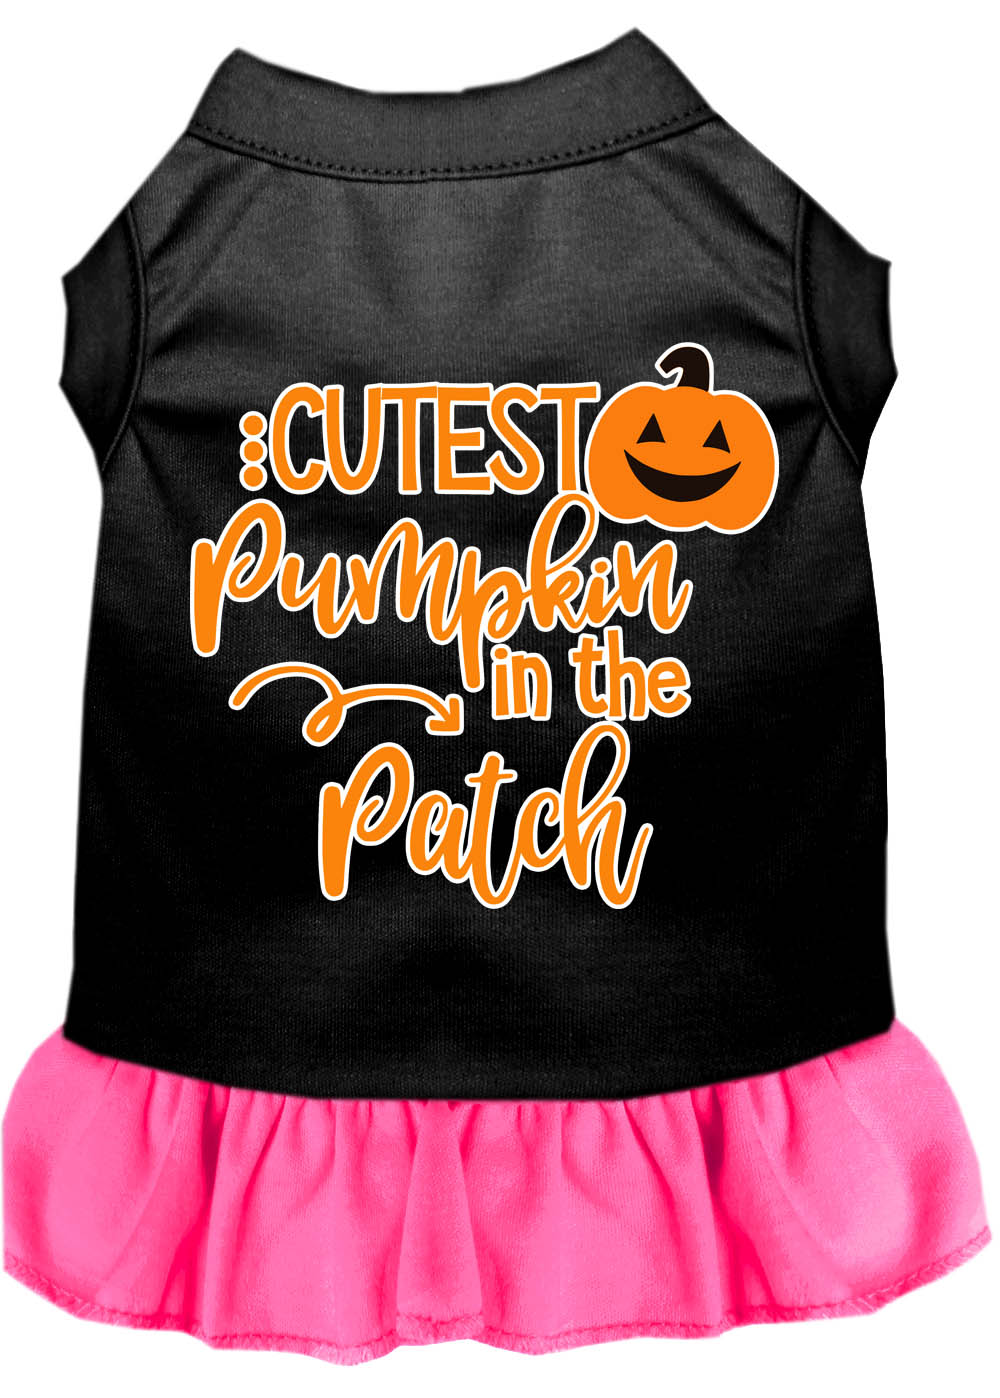 Cutest Pumpkin in the Patch Screen Print Dog Dress Black with Bright Pink Med